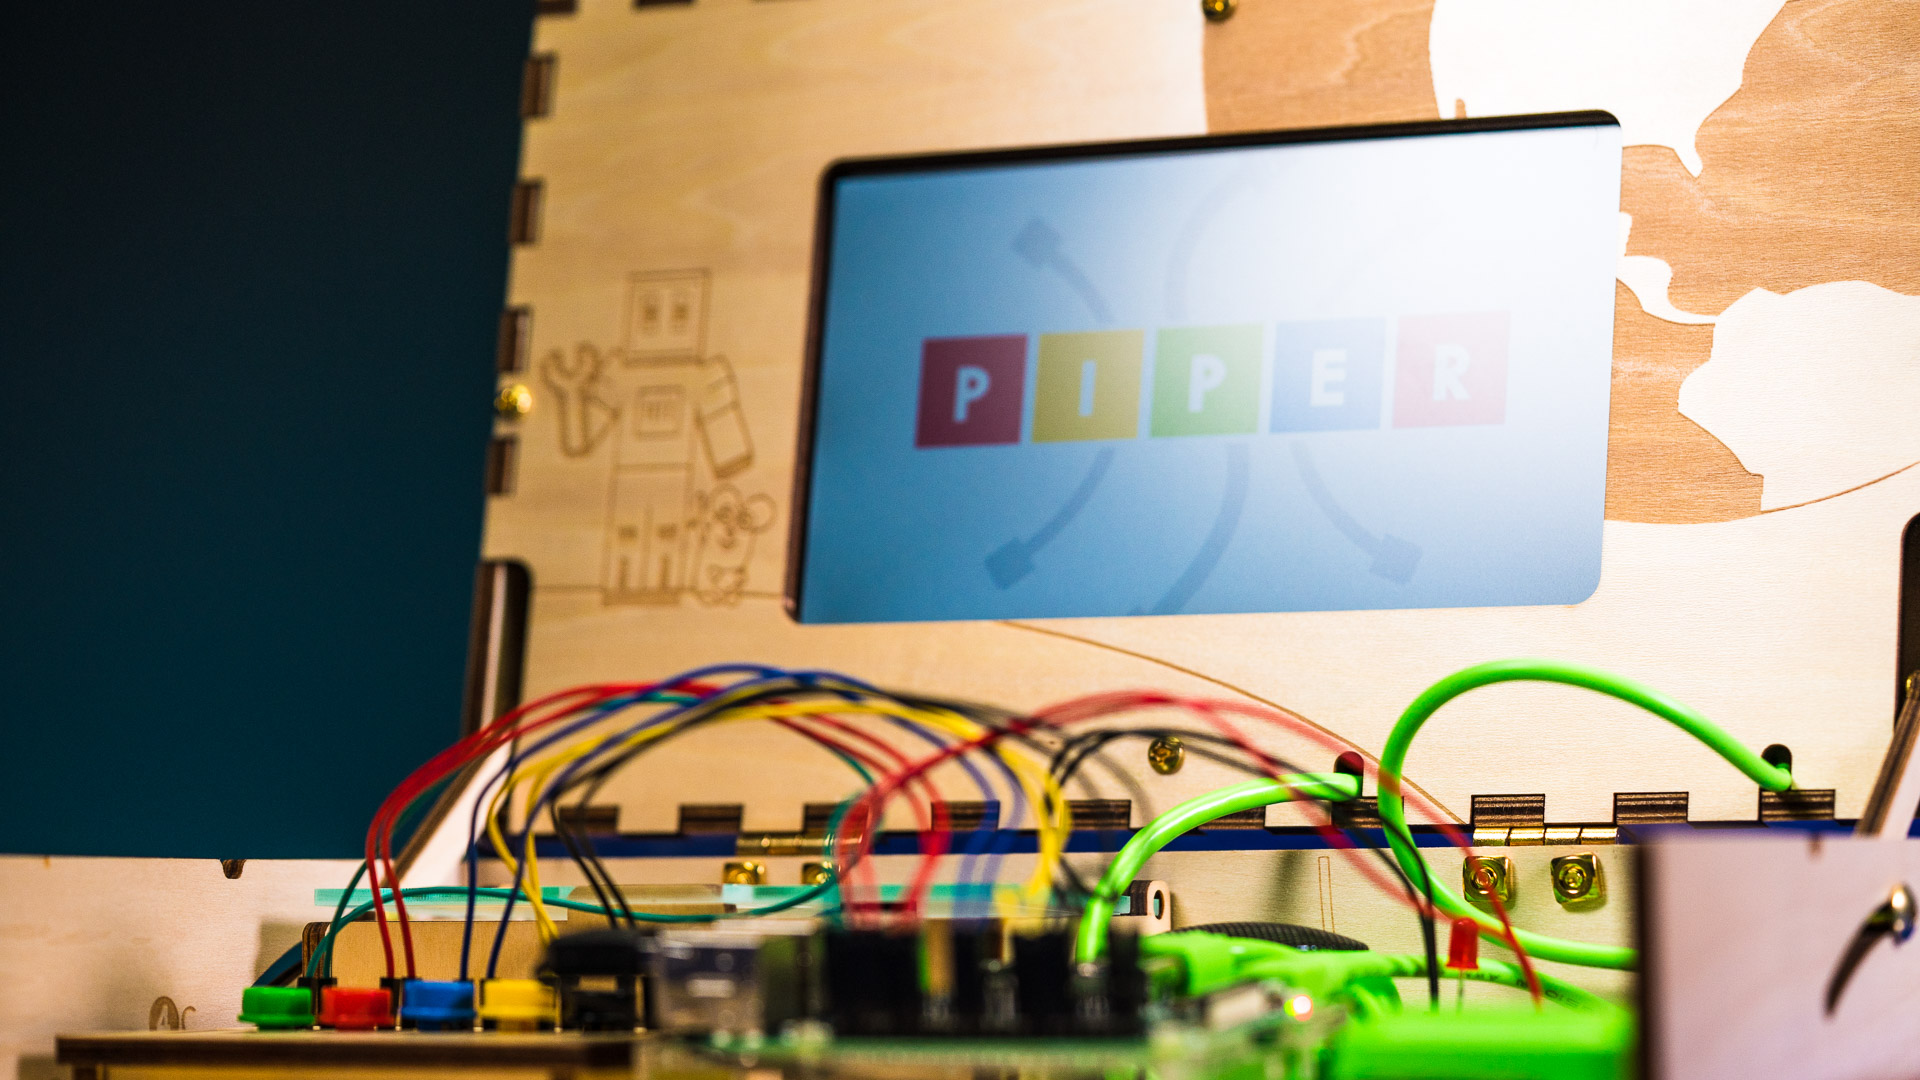 The Piper DIY computer kit teaches young kids about computing, coding, and engineering in a fun way with Minecraft.